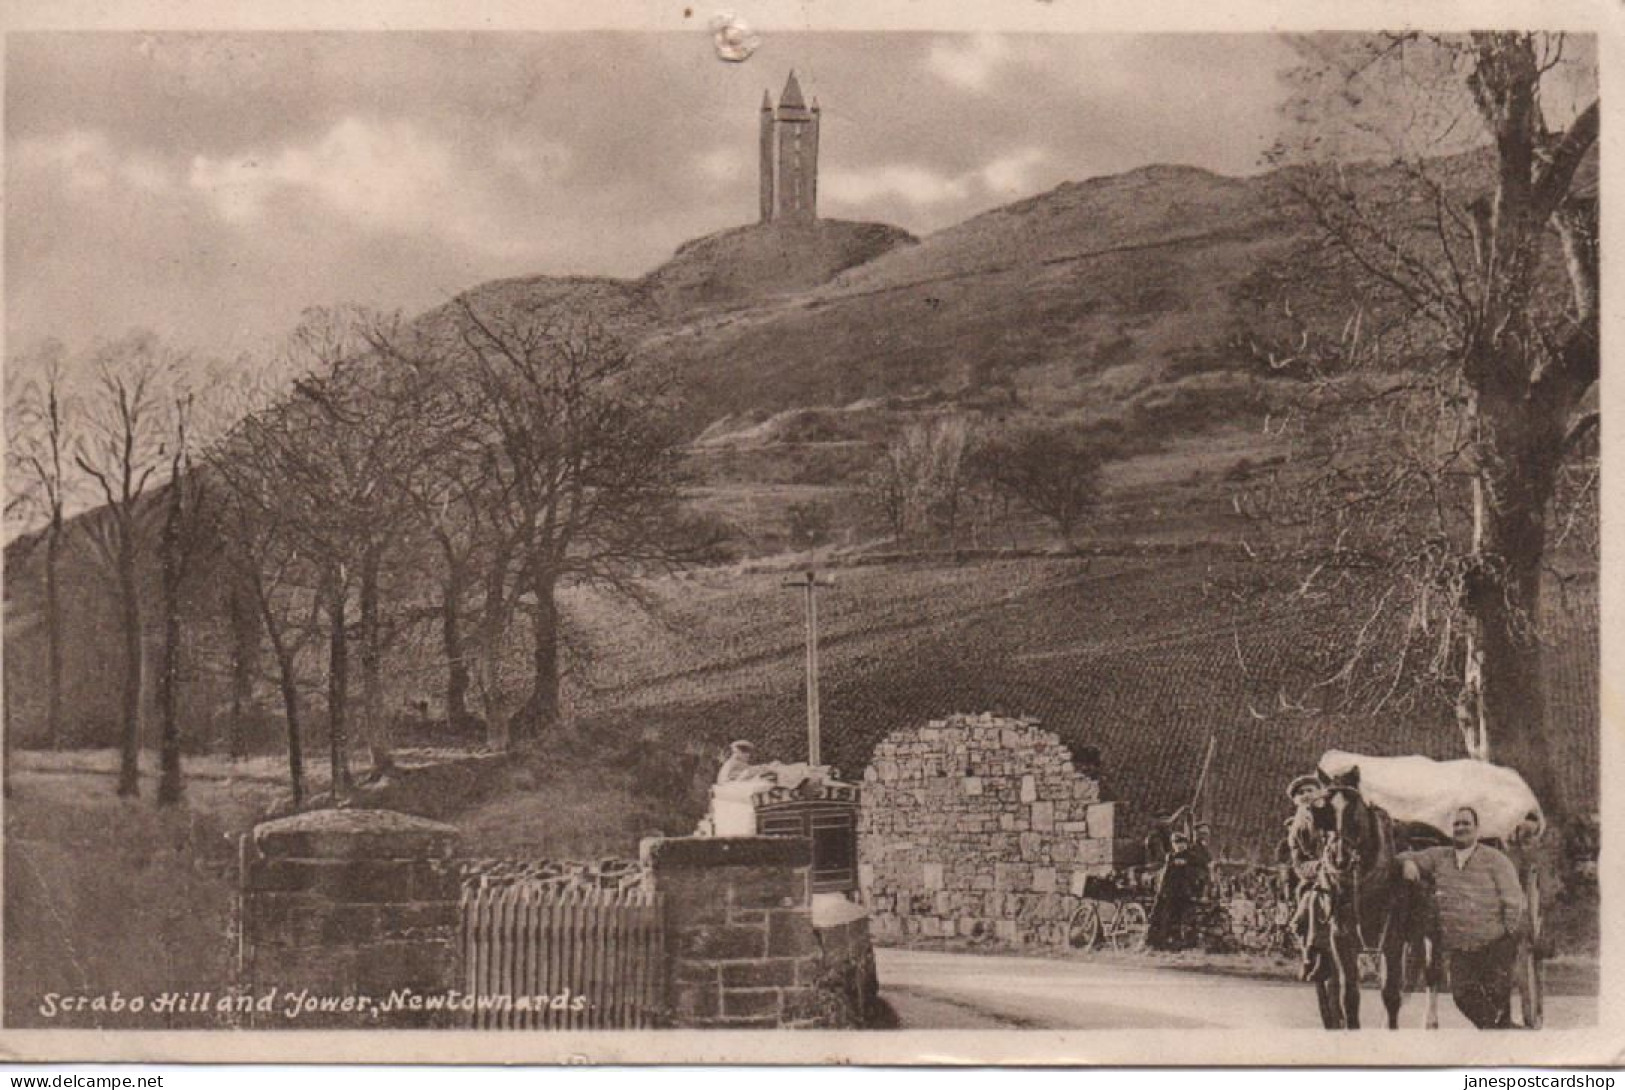 SCRABO HILL AND TOWER NEWTOWNARDS - COUNTY DOWN - IRELAND  - BBELFAST  POSTMARK -1947 - Down